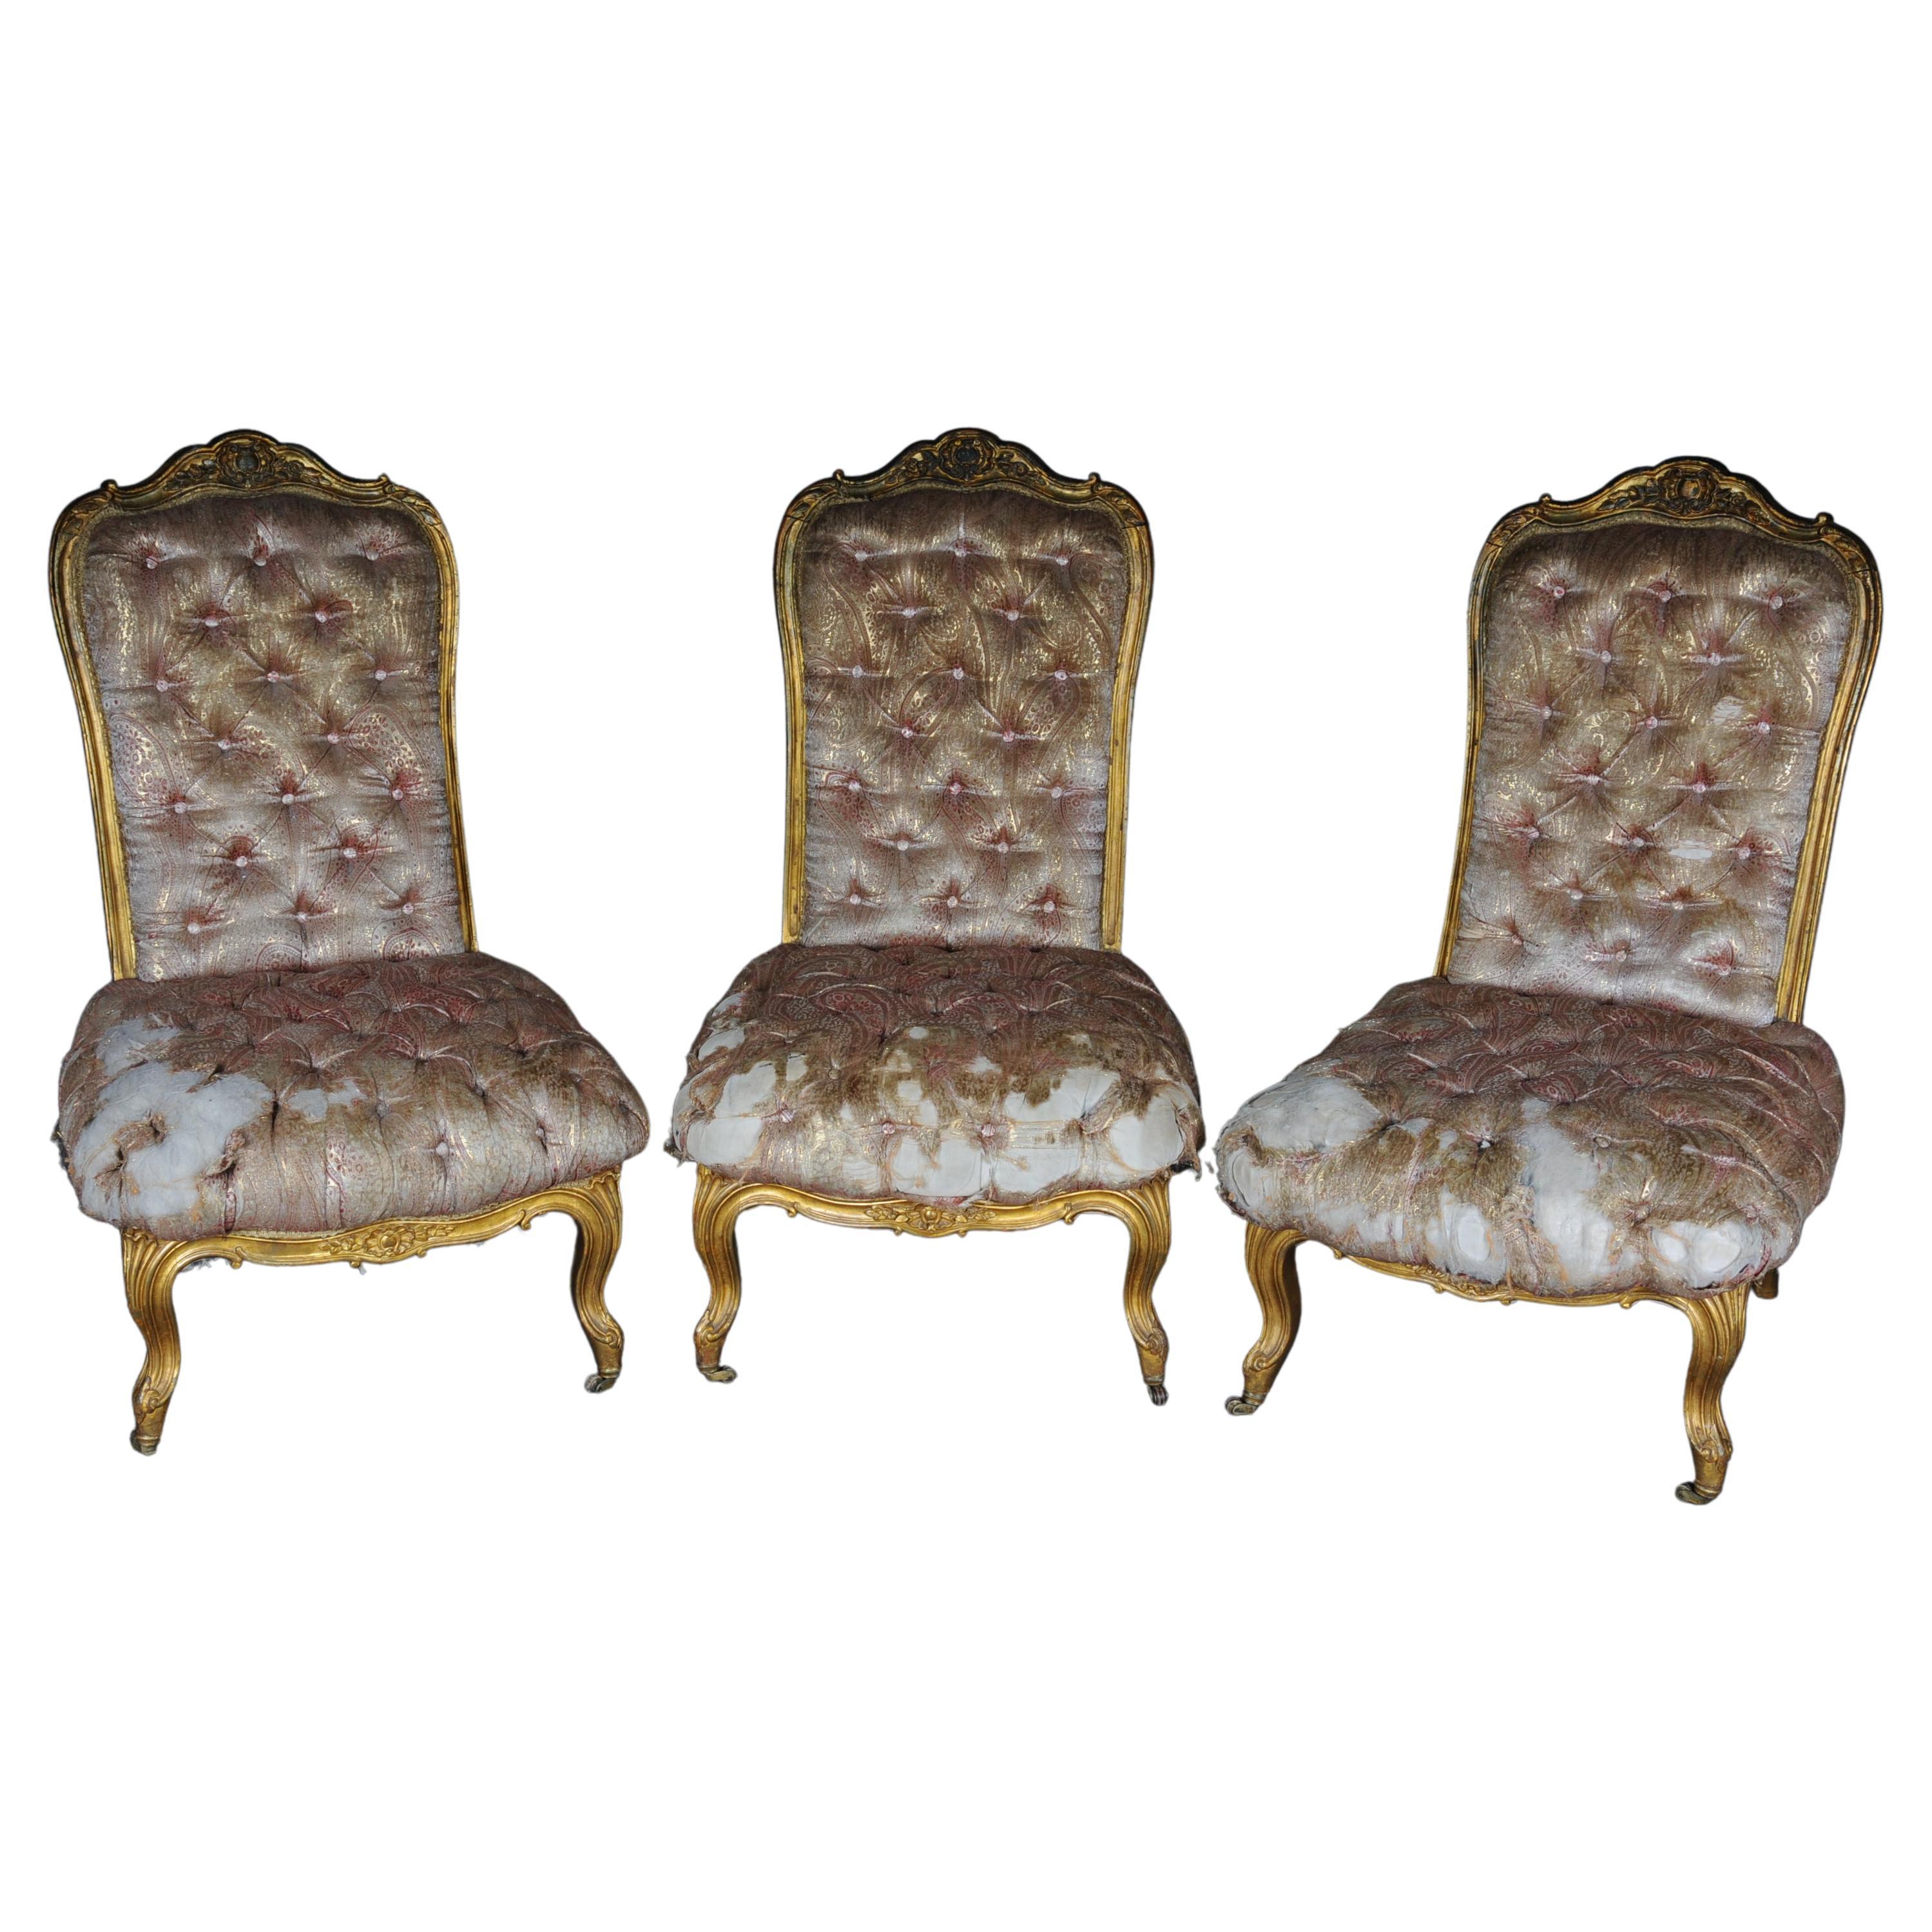 3 French Salon Lounge Chairs from the Bellevue Palace in Berlin, Gold from 1890 For Sale